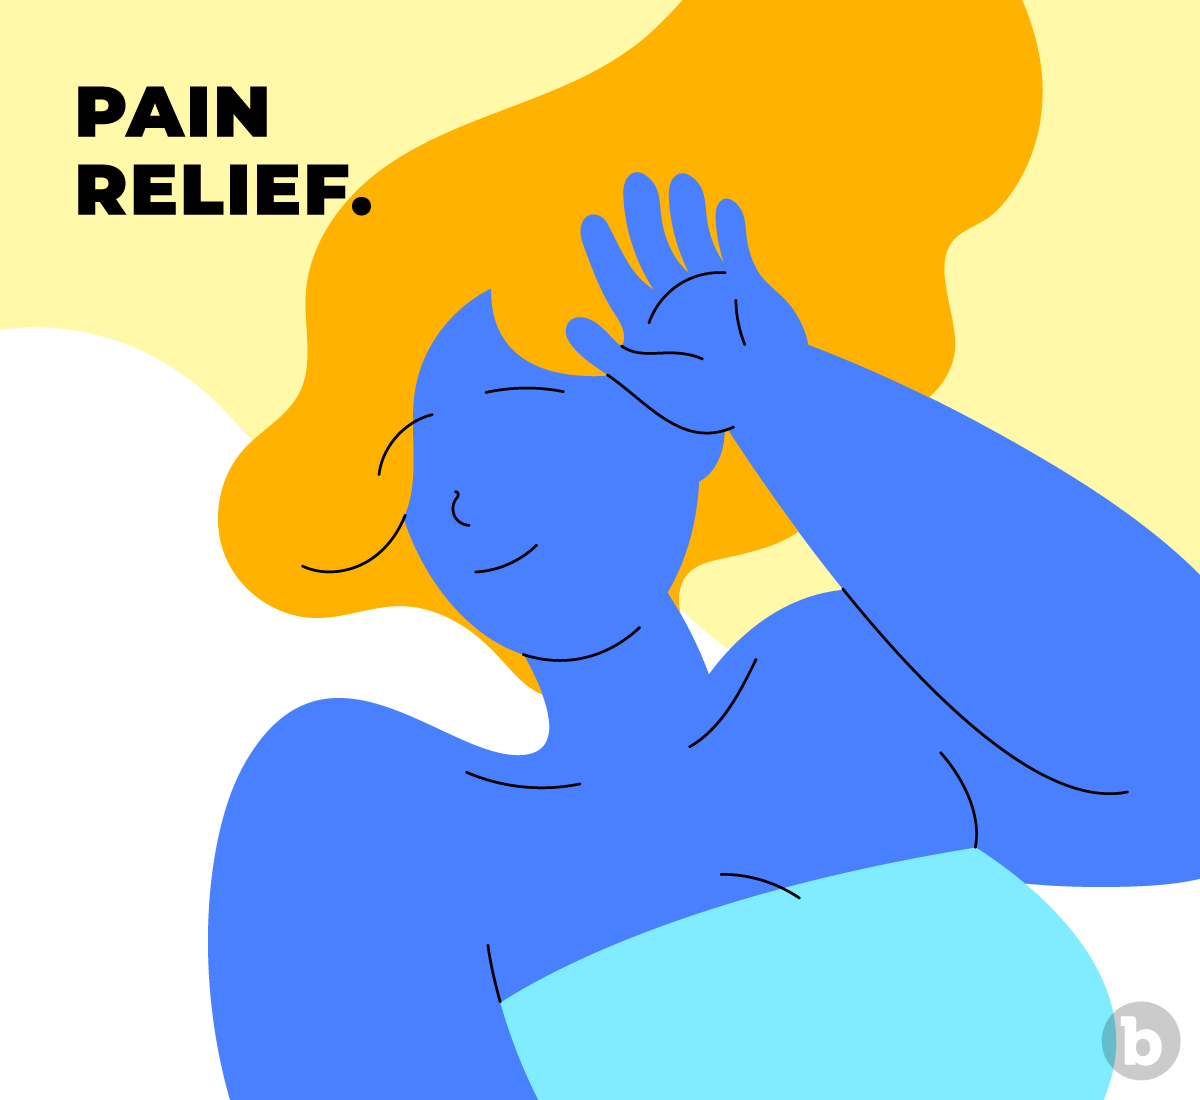 Pain relief is a health benefit of having orgasms